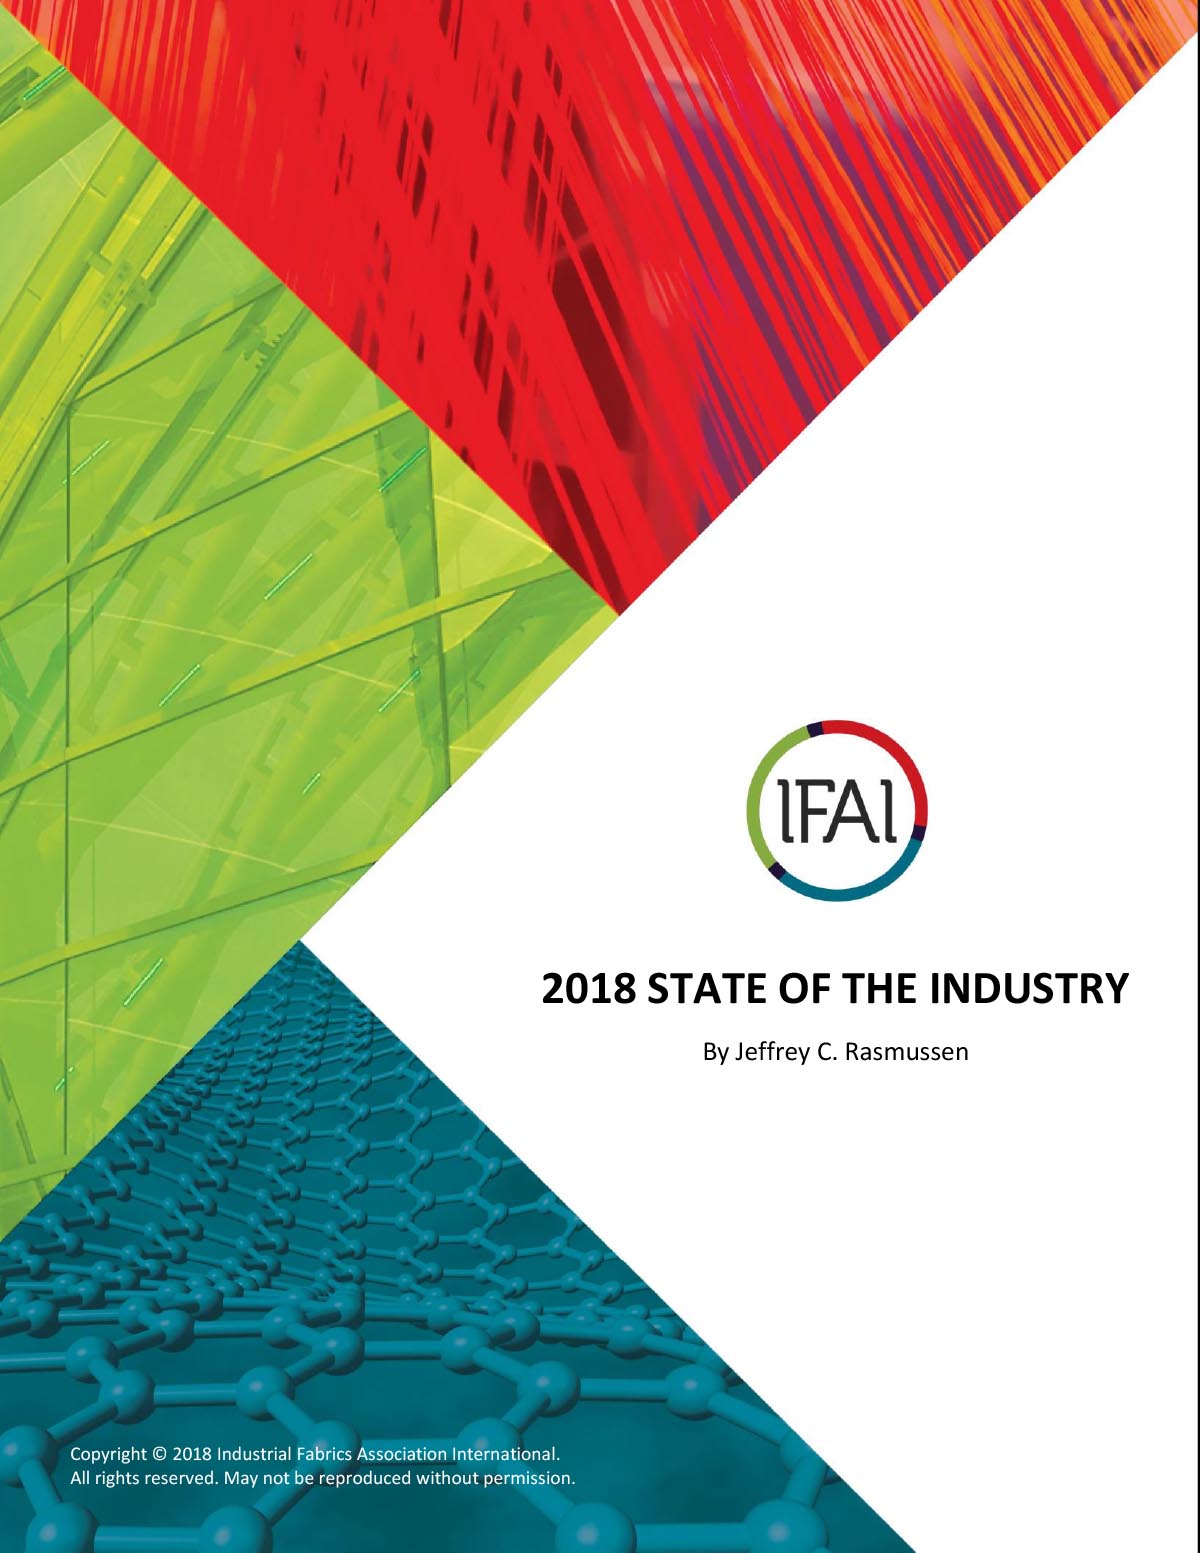 State of the Industry 2018